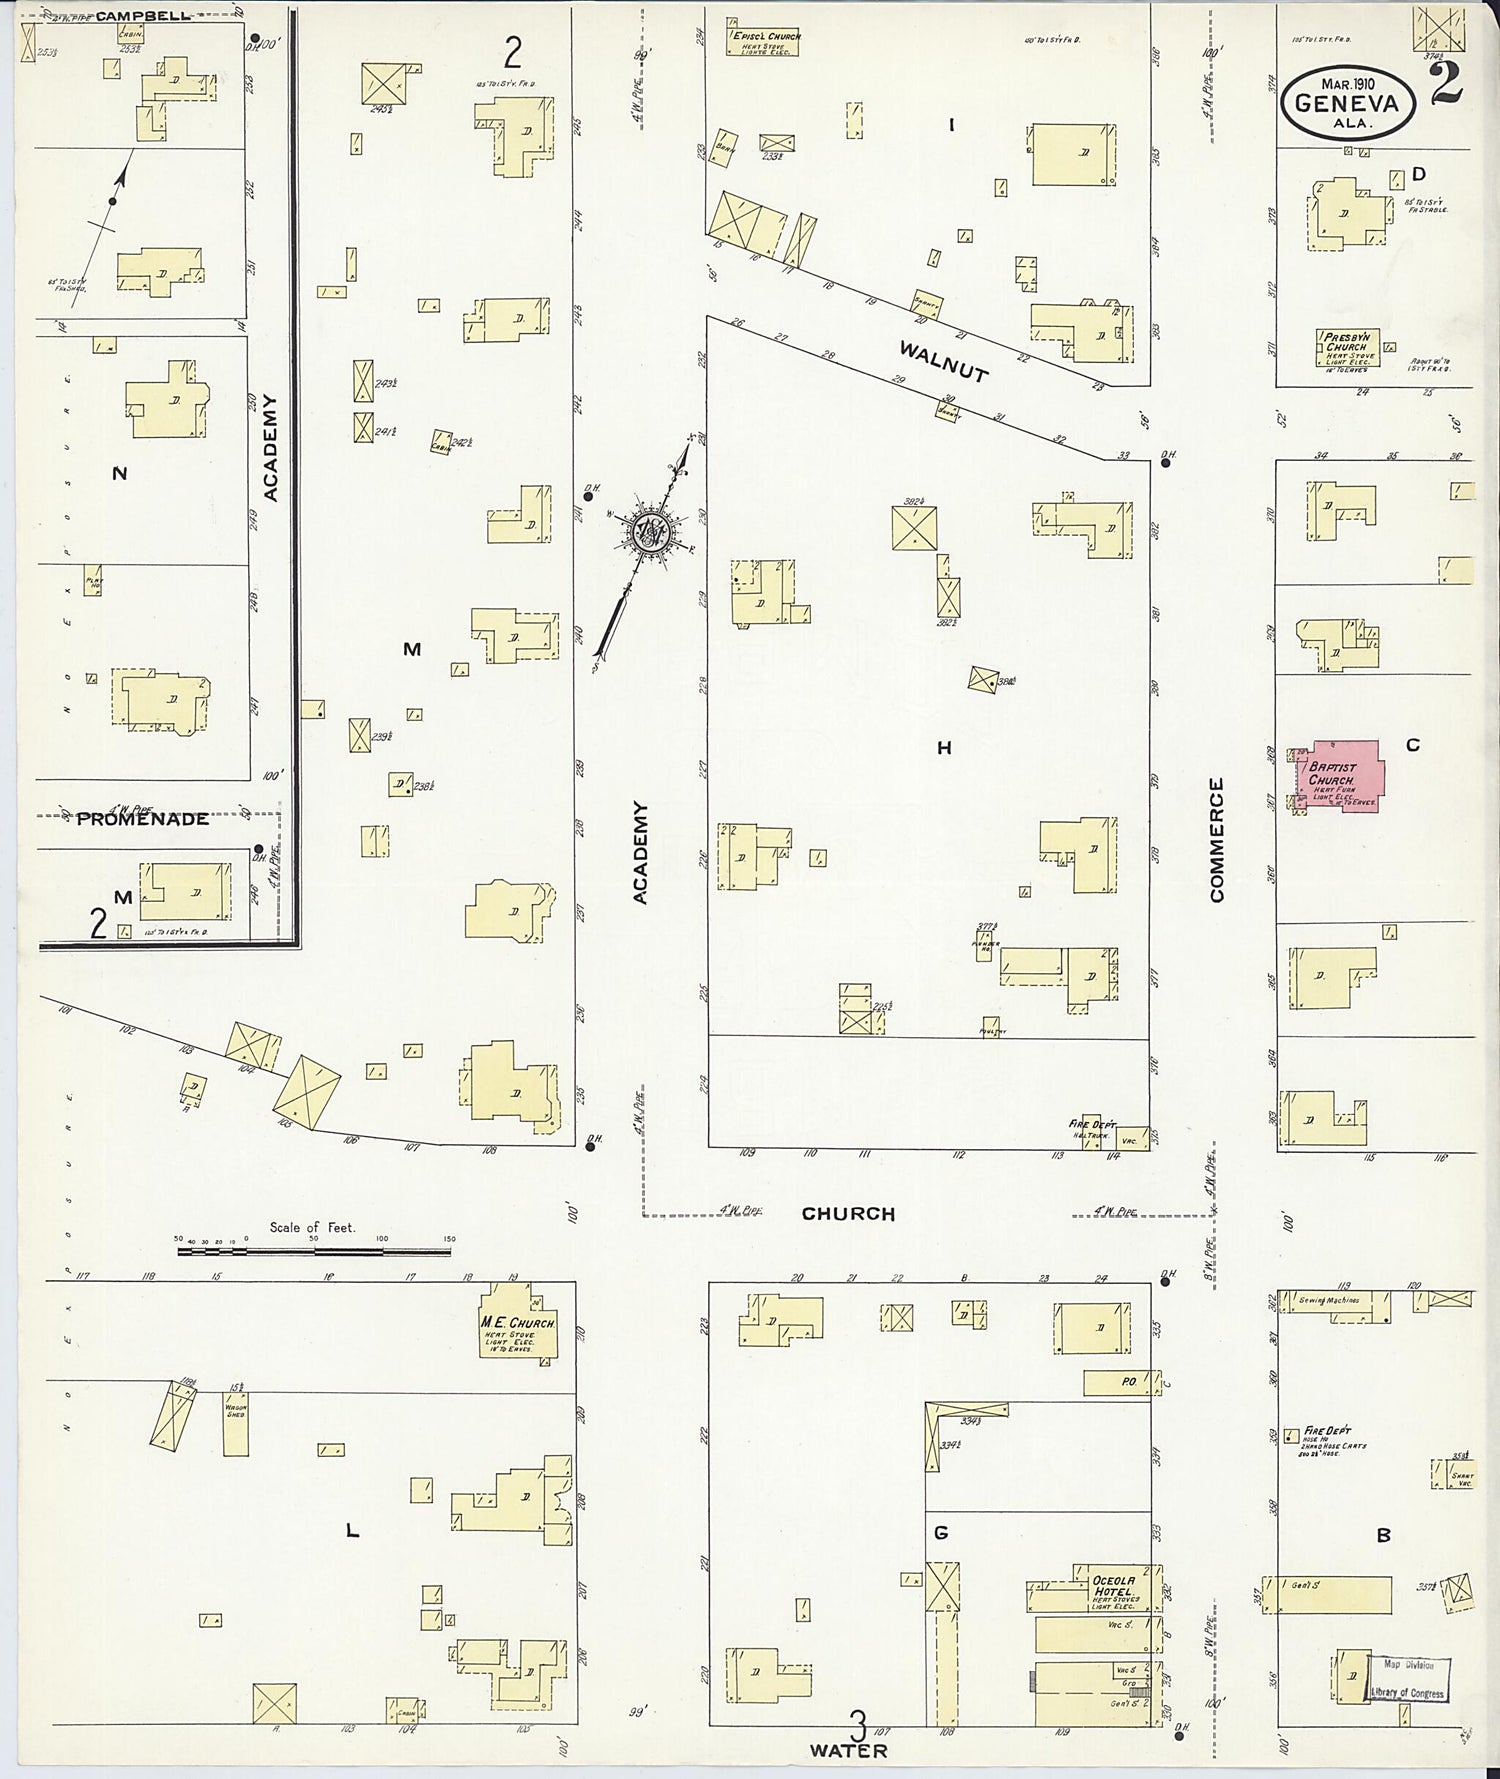 This old map of Geneva, Geneva County, Alabama was created by Sanborn Map Company in 1910